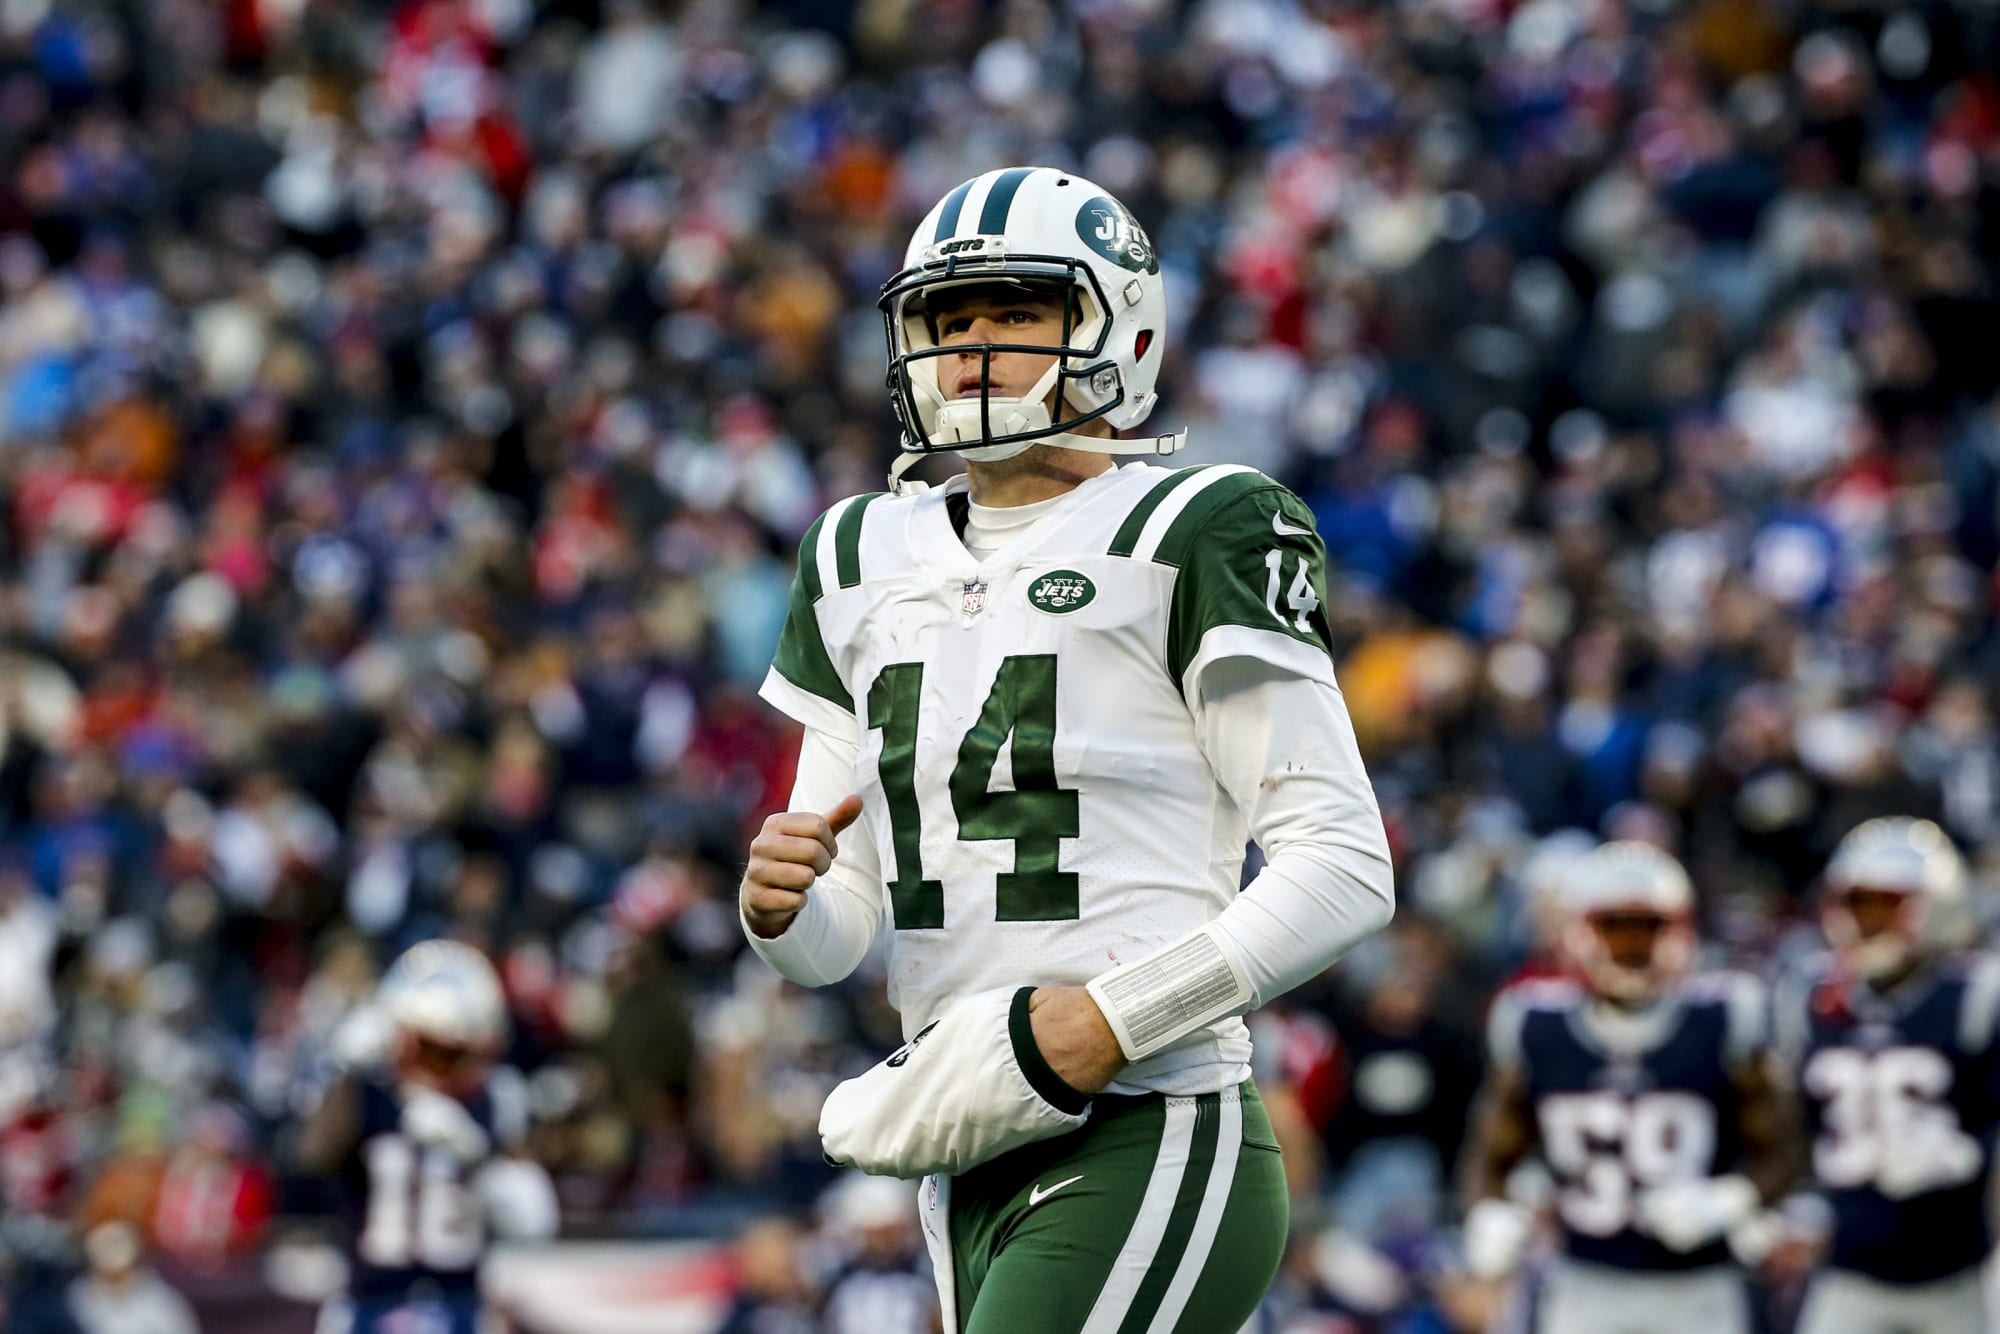 A look at the New York Jets offensive positional breakdown